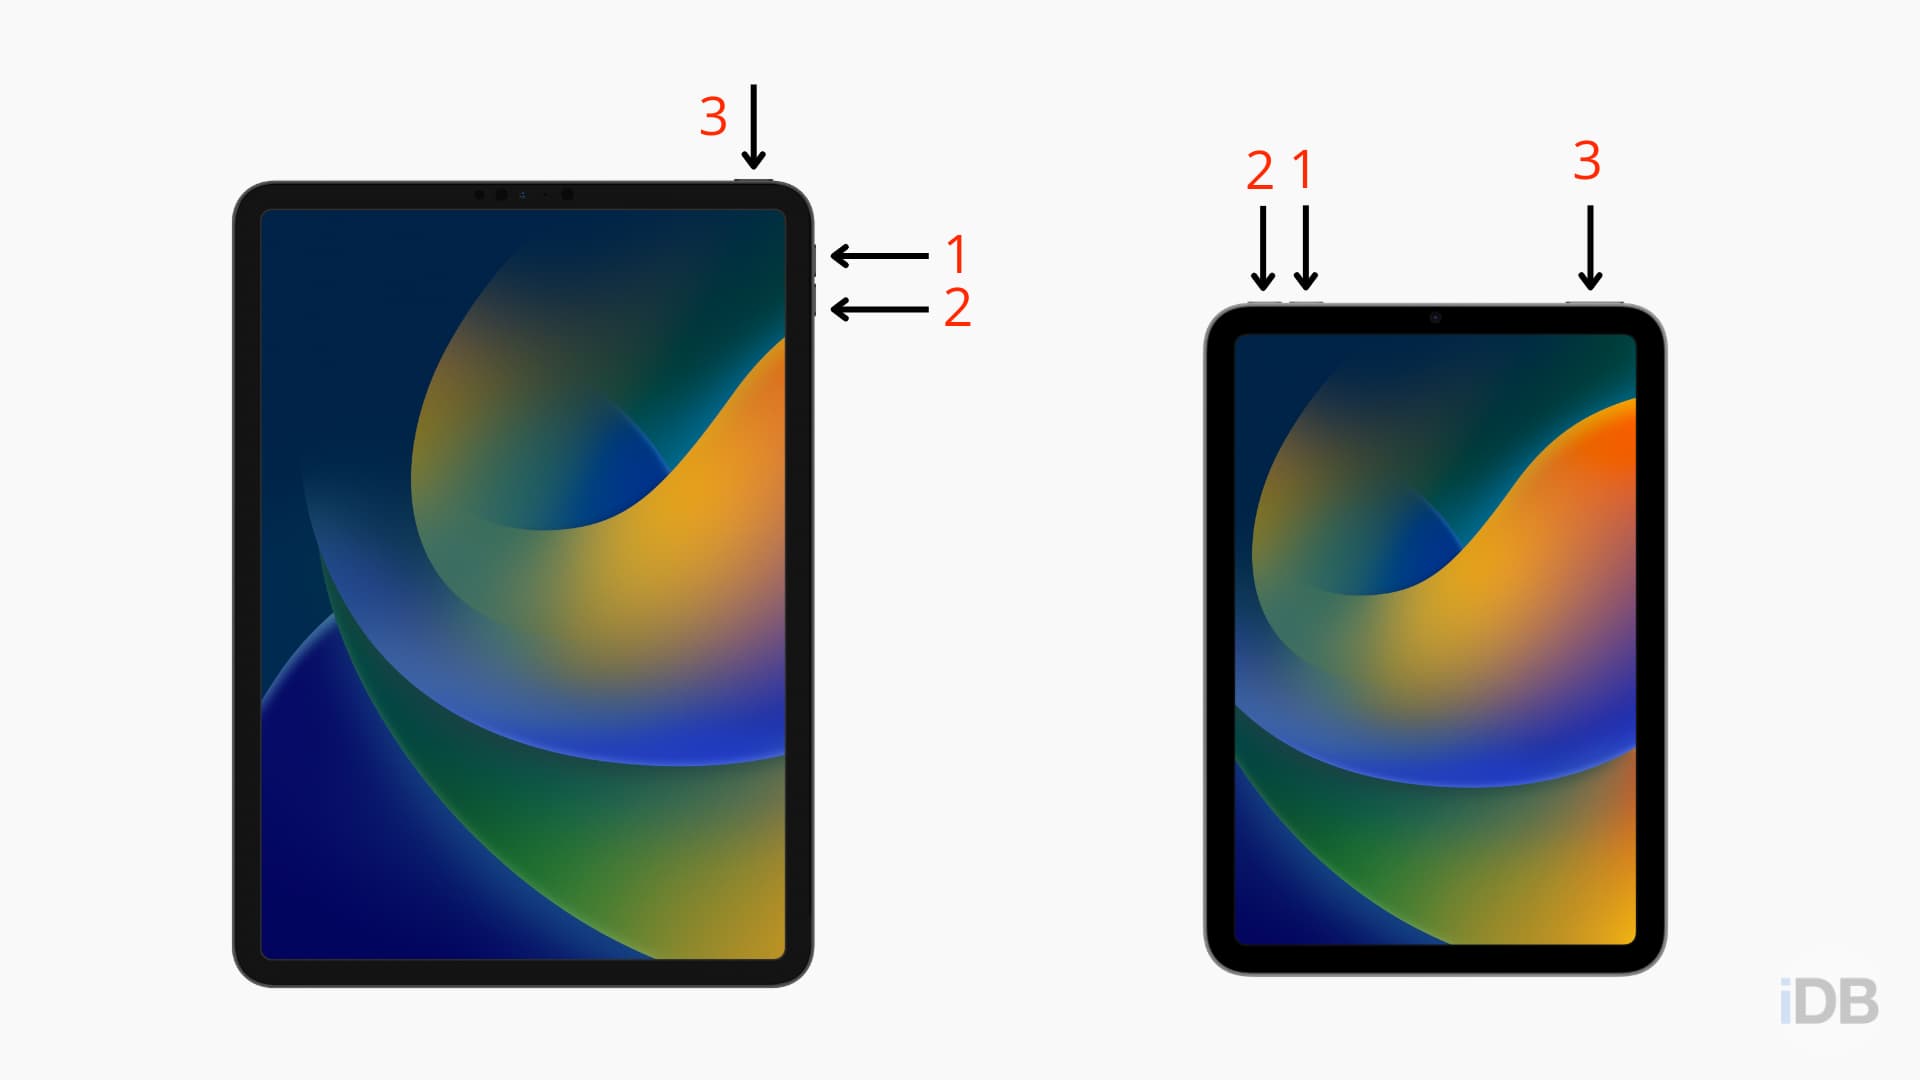 Image composition showing how to force restart iPad models with Face ID or with Touch ID at the top